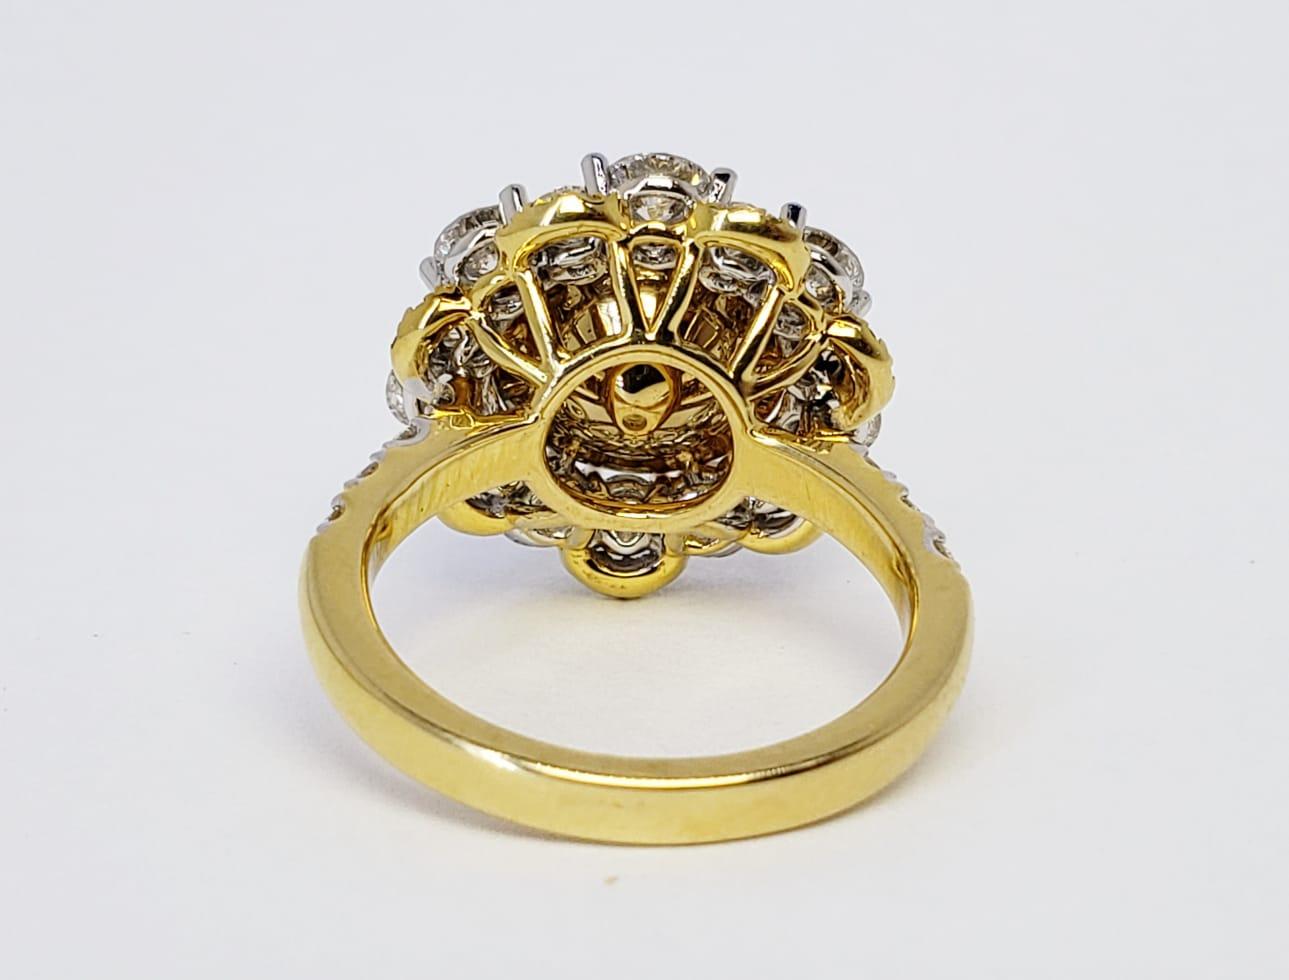 Rosenberg Diamonds & Co. 2.56 carat Round brilliant Fancy Light Yellow VVS1 clarity is accompanied by a GIA certificate. This extremely rare Round diamond named THE ECLIPSE is set in a handmade 18 karat white & yellow gold setting. This ring boasts